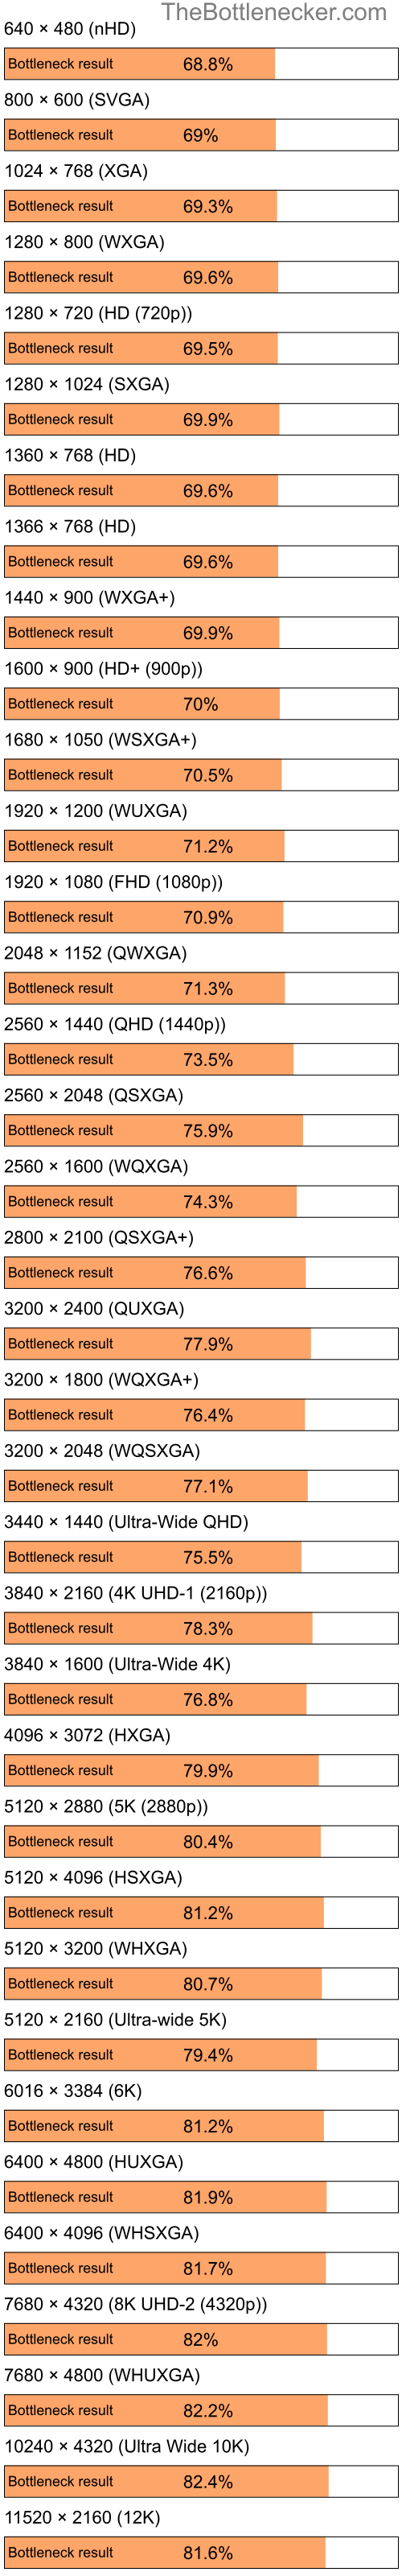 Bottleneck results by resolution for Intel Pentium 4 and AMD Mobility Radeon HD 2300 in General Tasks